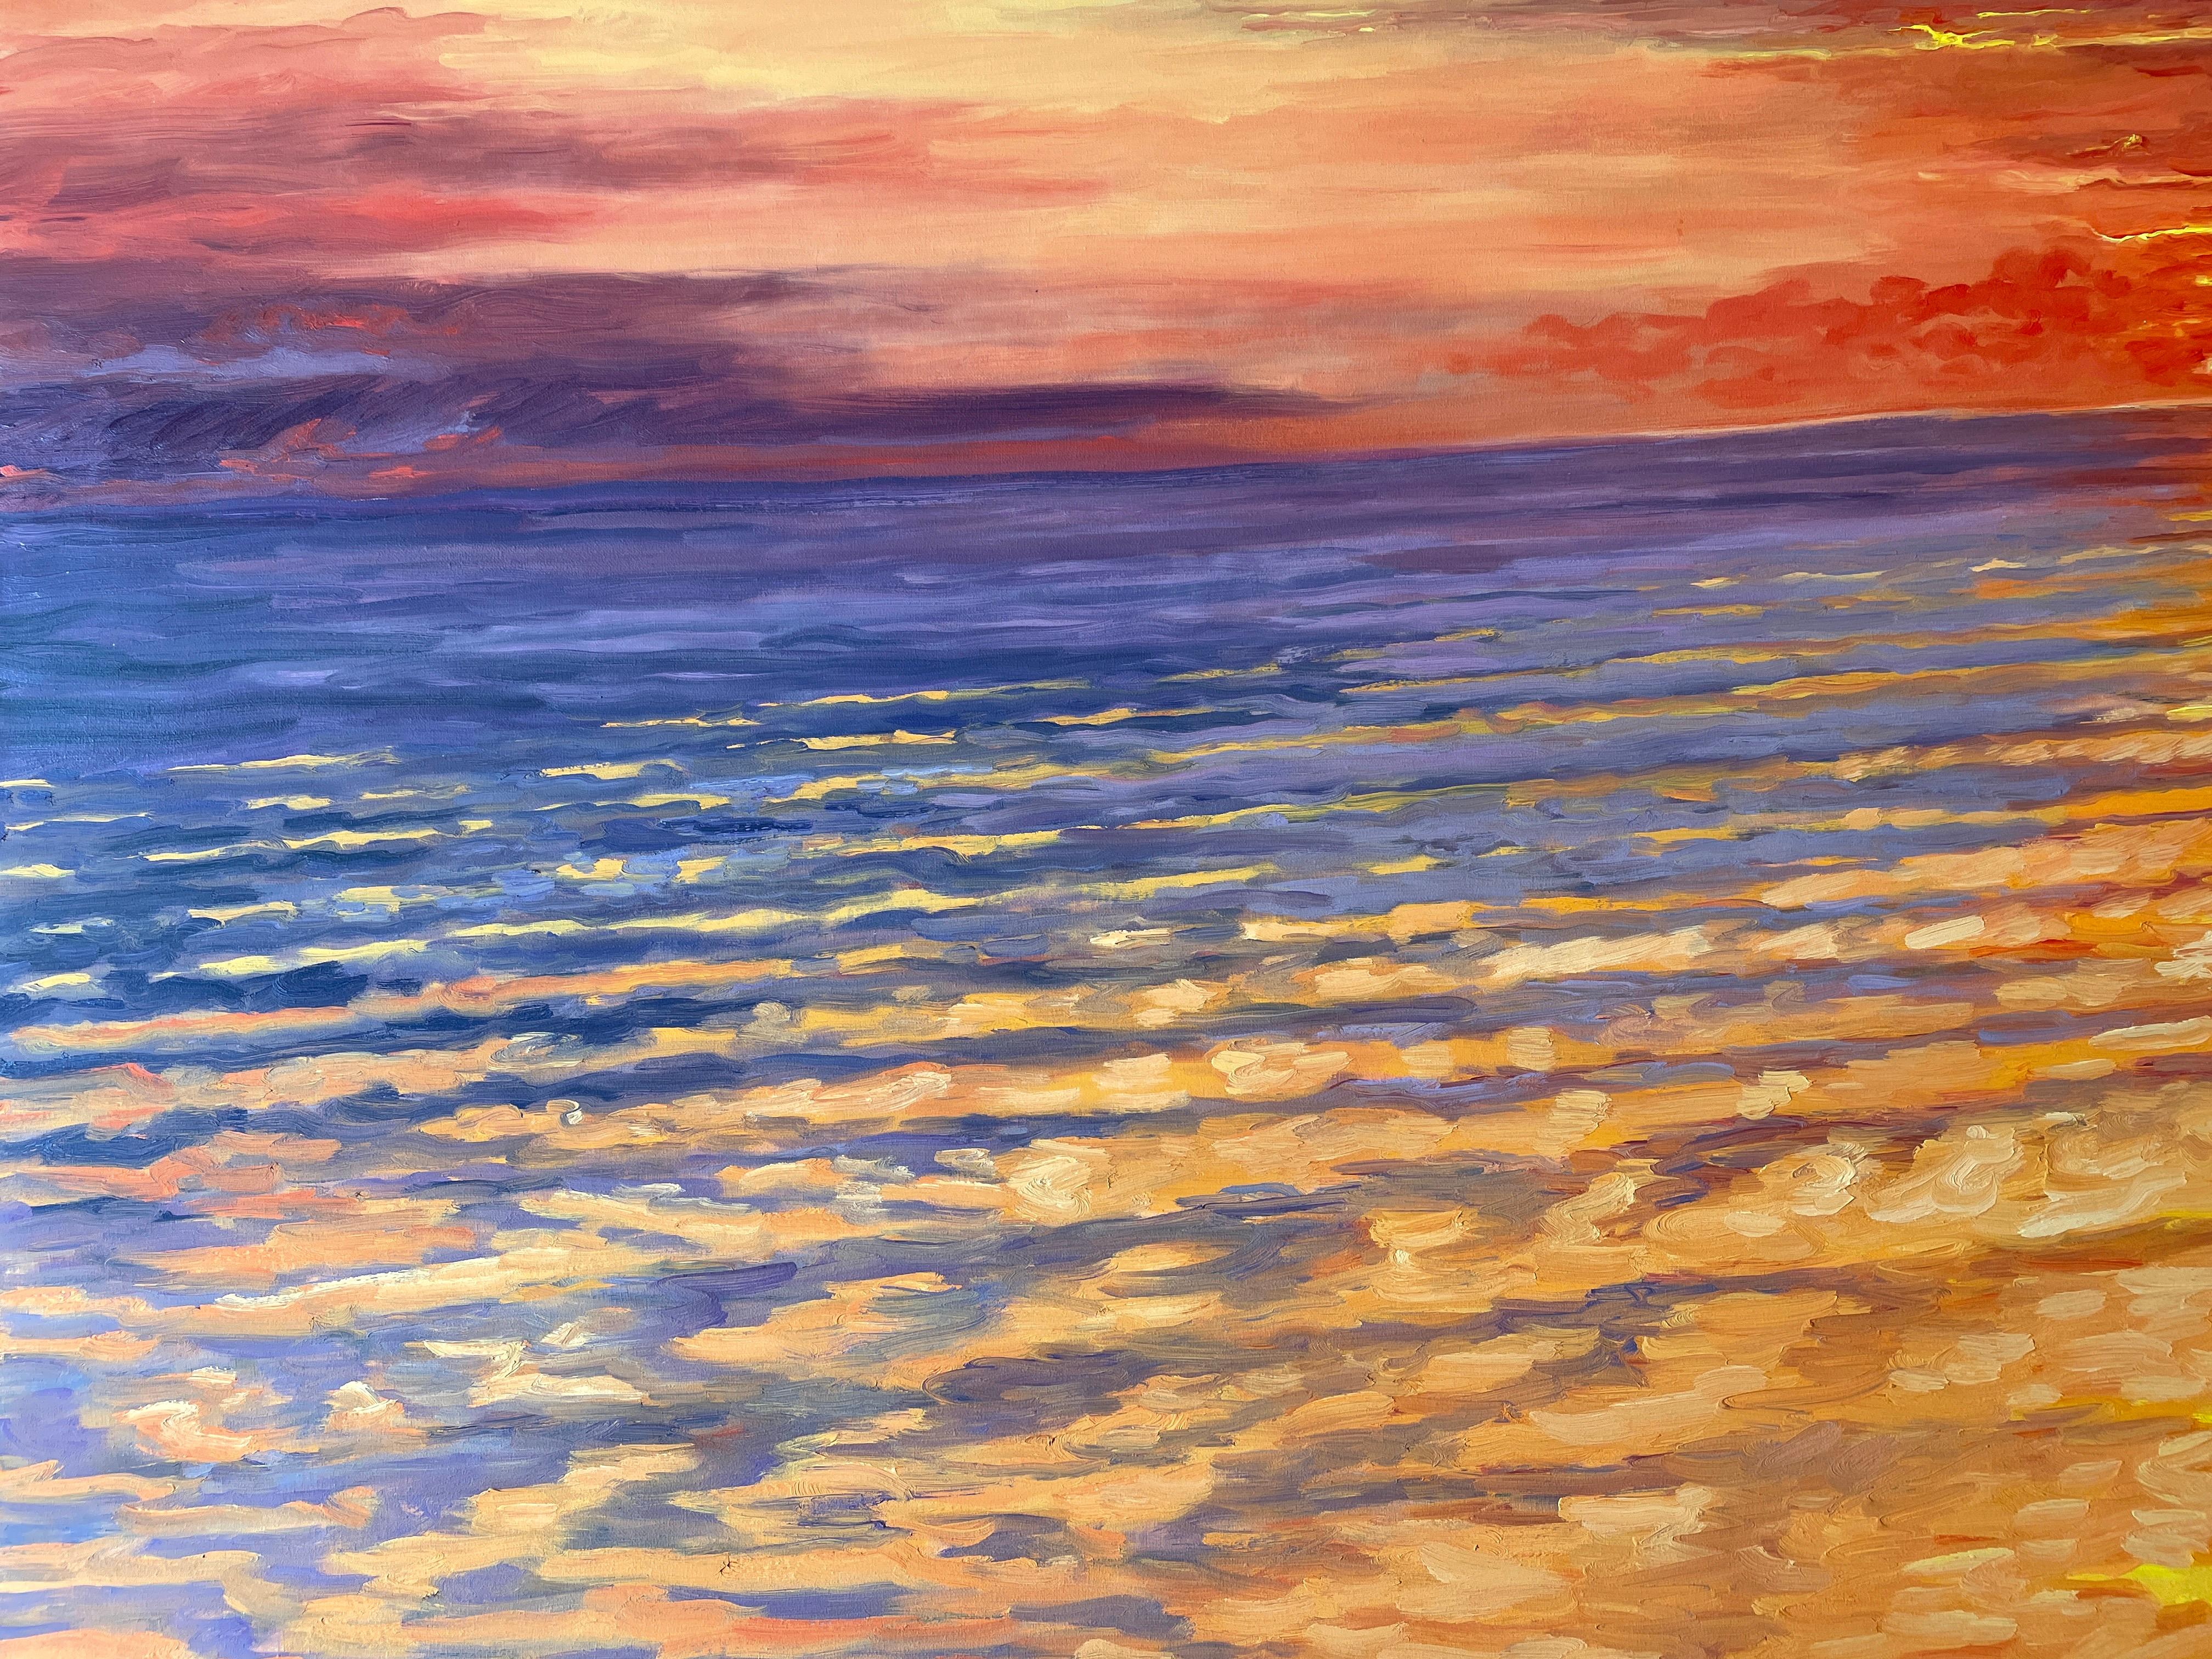 Dusk as the setting sun turns ocean and sky on fire. Title - Sunset  - American Realist Painting by Carl Scorza